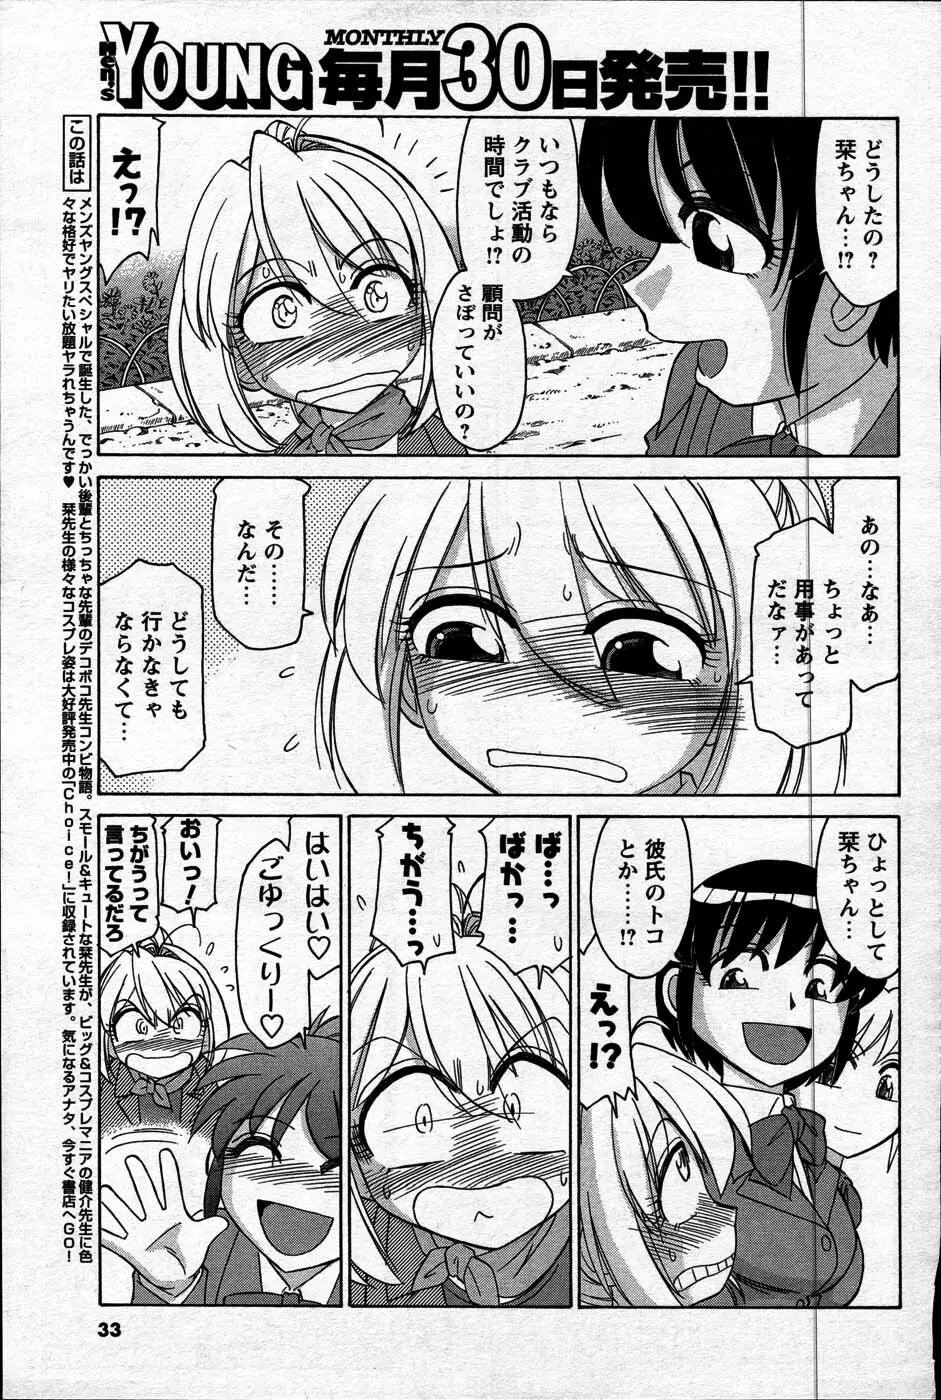 Comic Mens Young Special IKAZUCHI vol. 2 31ページ